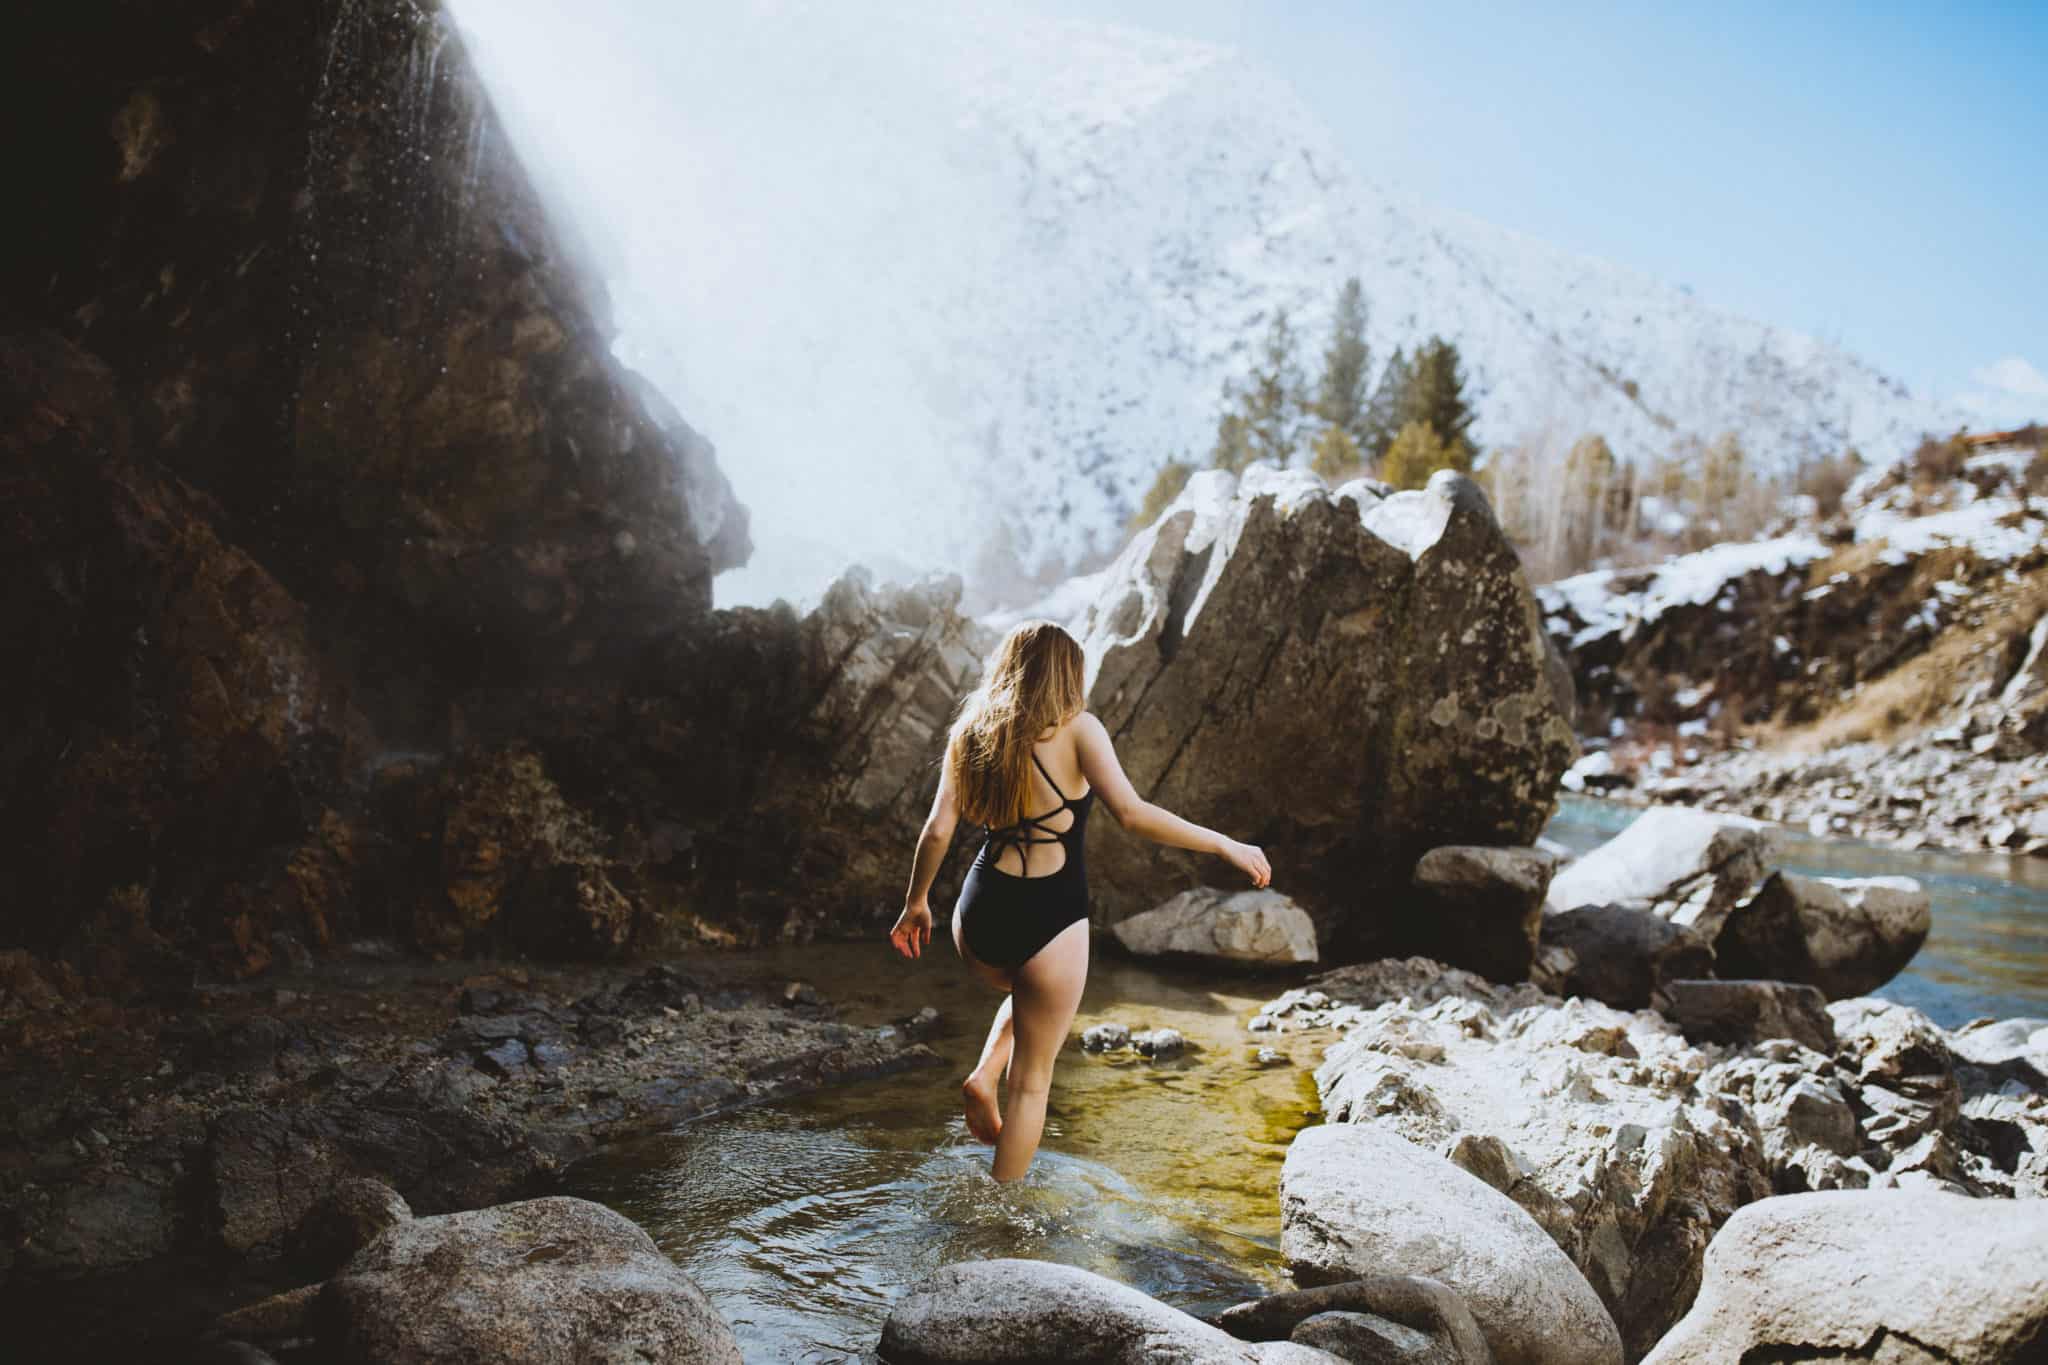 What To Expect At Kirkham Hot Springs In Idaho